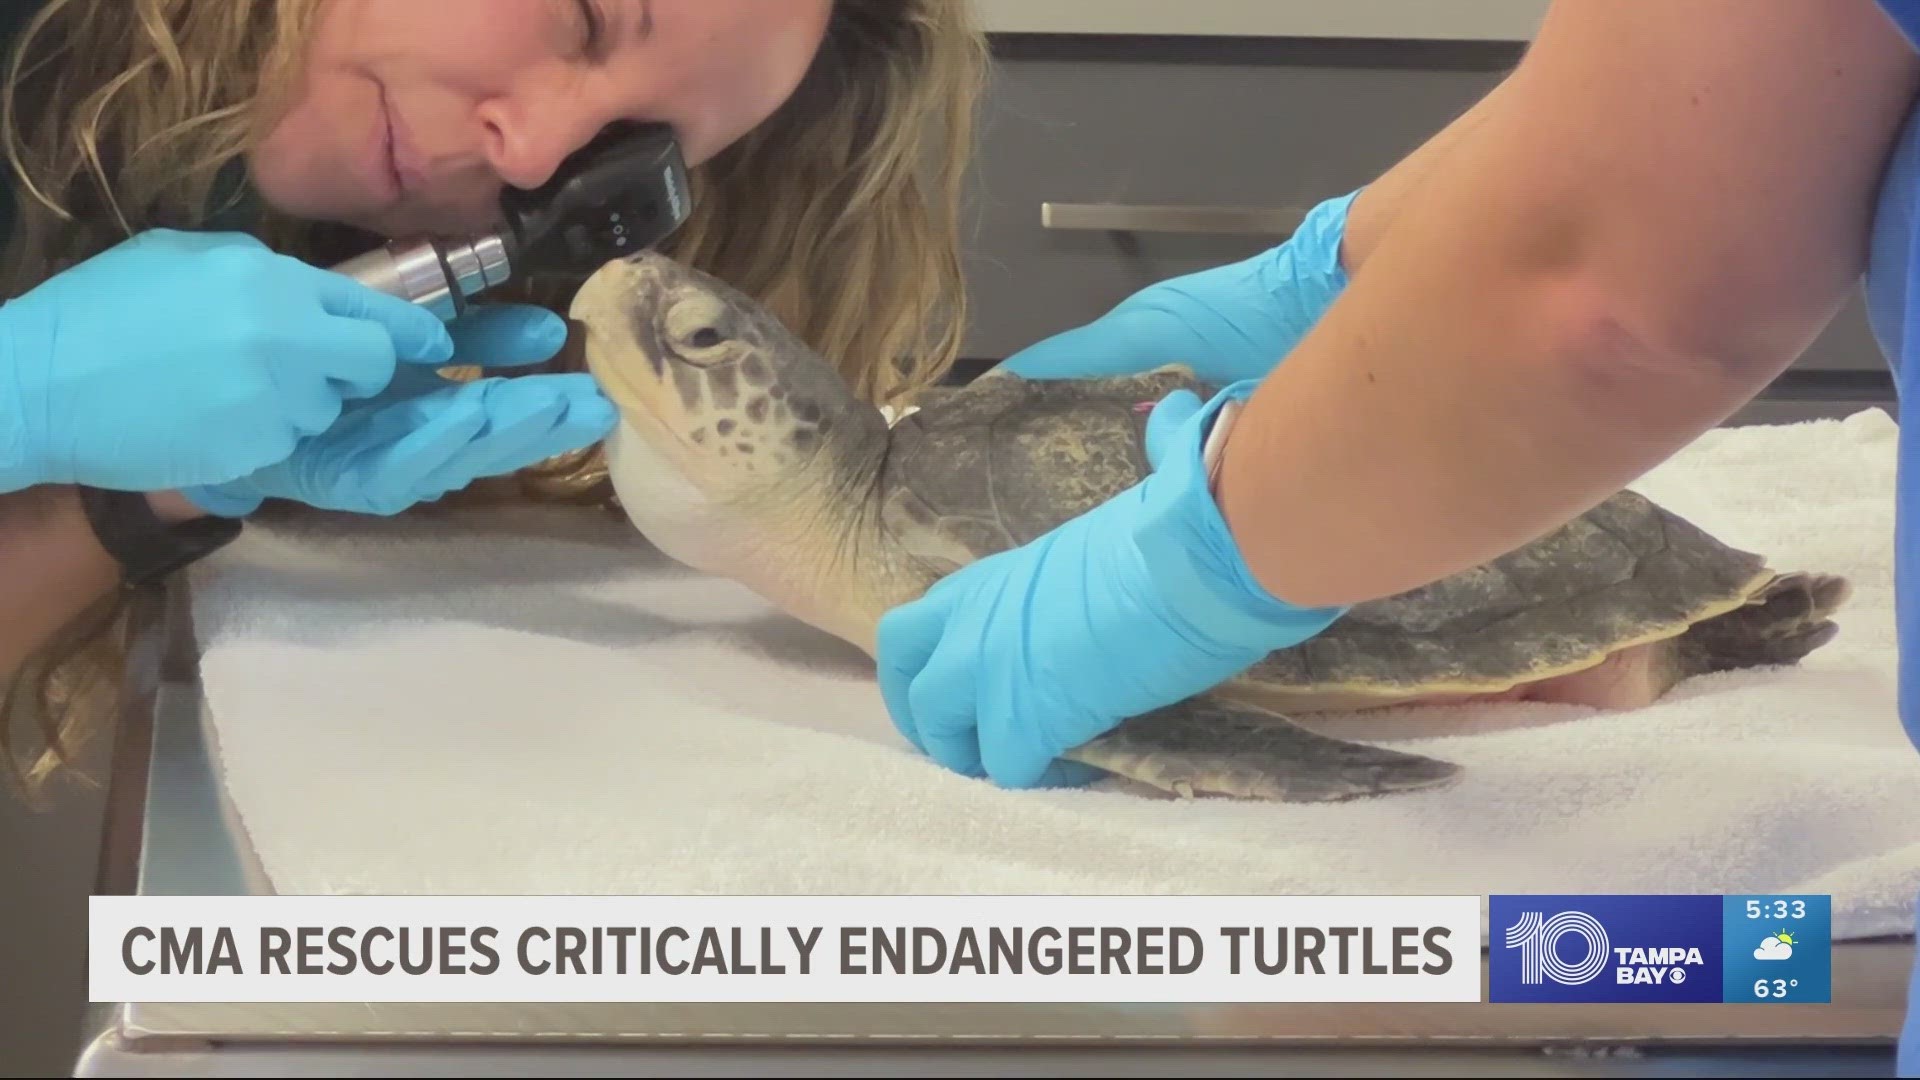 The 52 critically endangered Kemp's Ridley sea turtles were trapped in icy waters up North and are now being treated at several Florida marine centers.